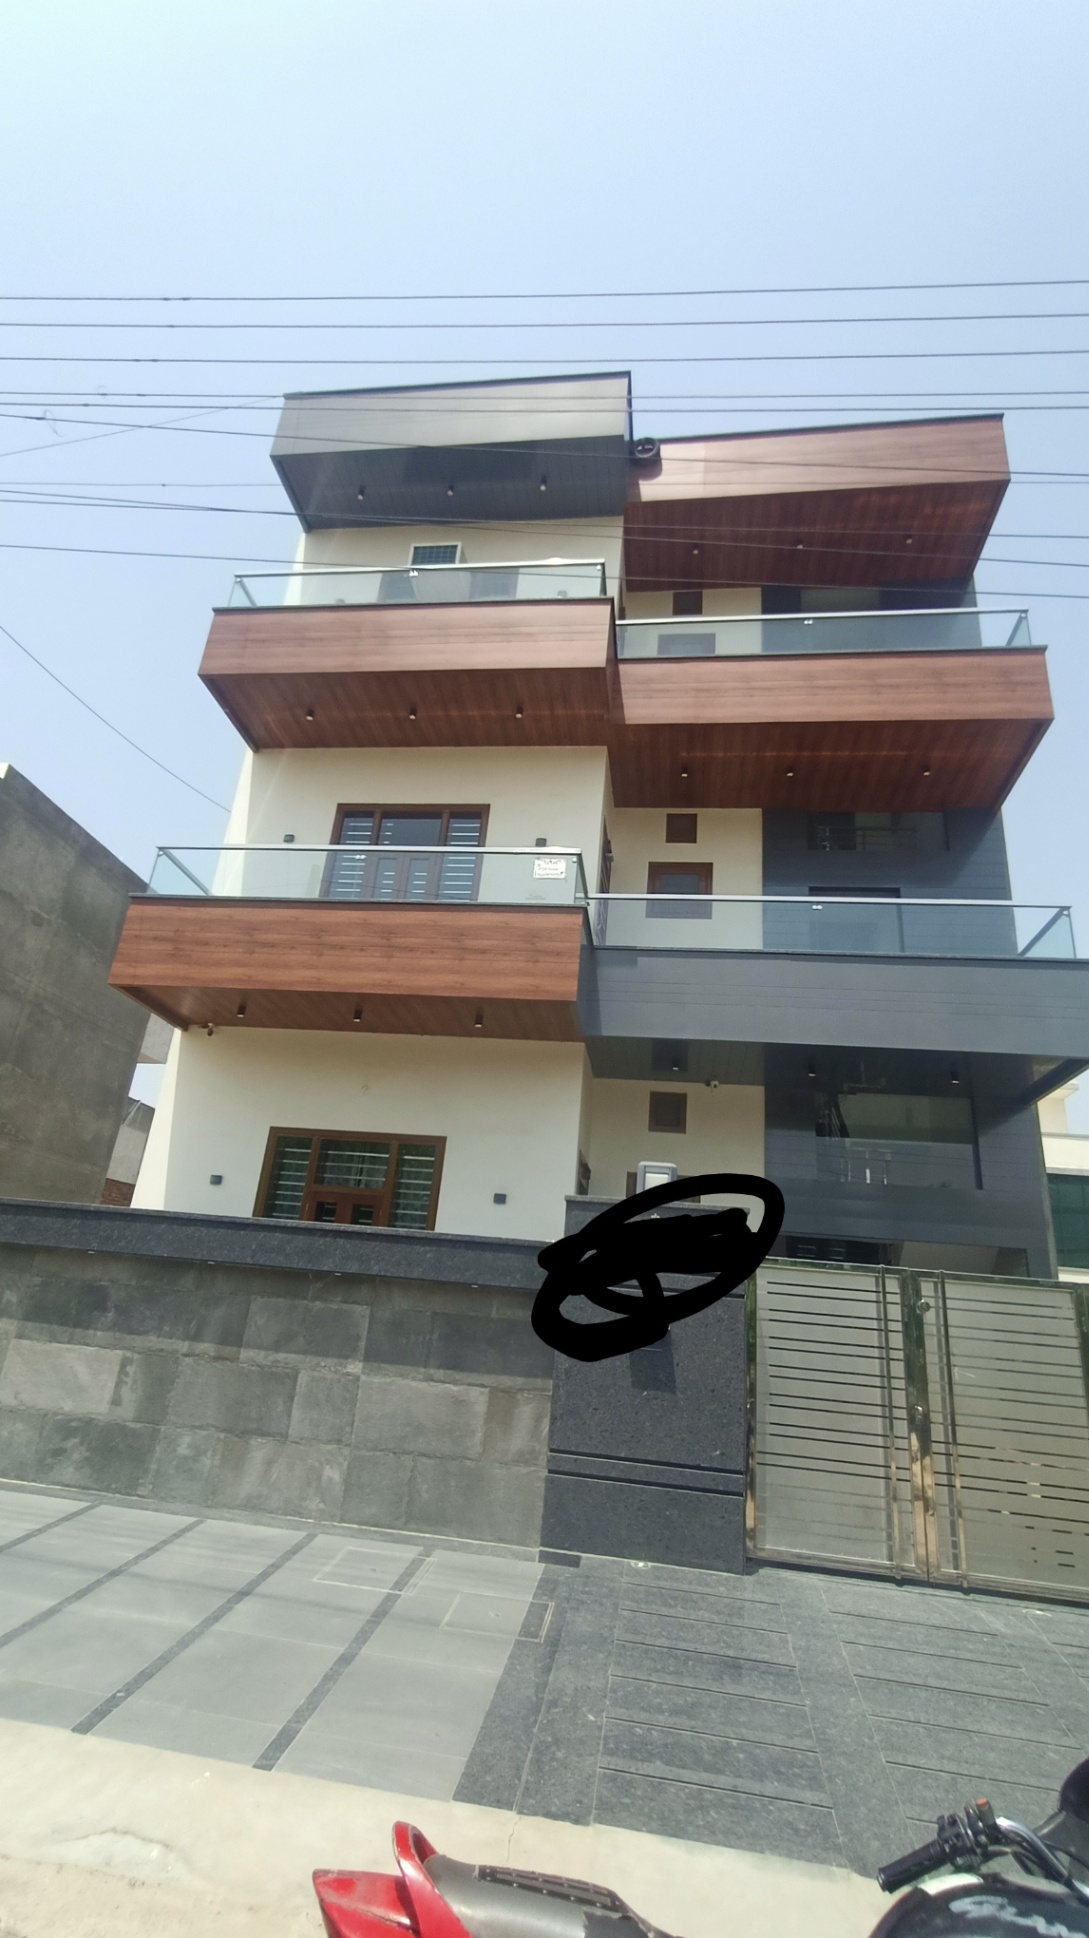 3 Bed/ 2 Bath Rent House/ Bungalow/ Villa; 250 sq. ft. carpet area, Semi Furnished for rent @Sector 14 hisar 